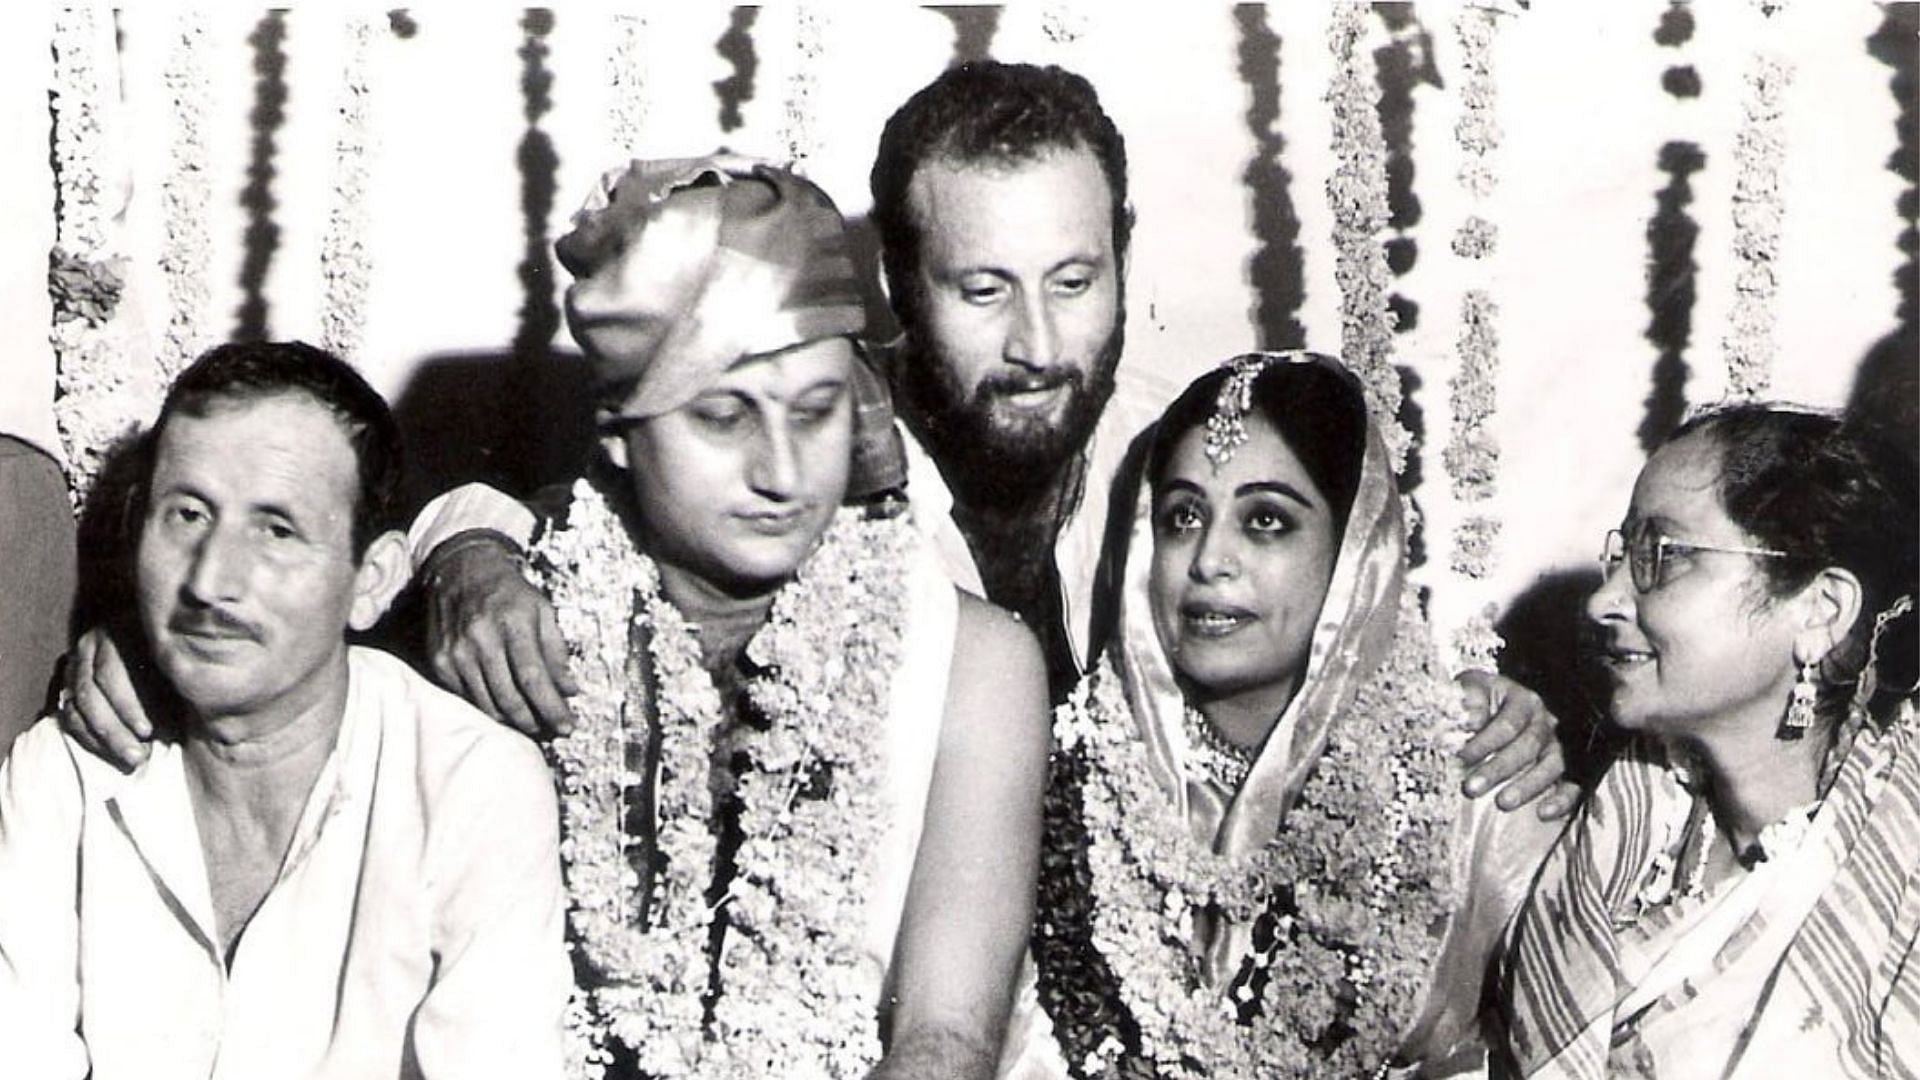 Anupam Kher and Kirron Kher on their wedding day.